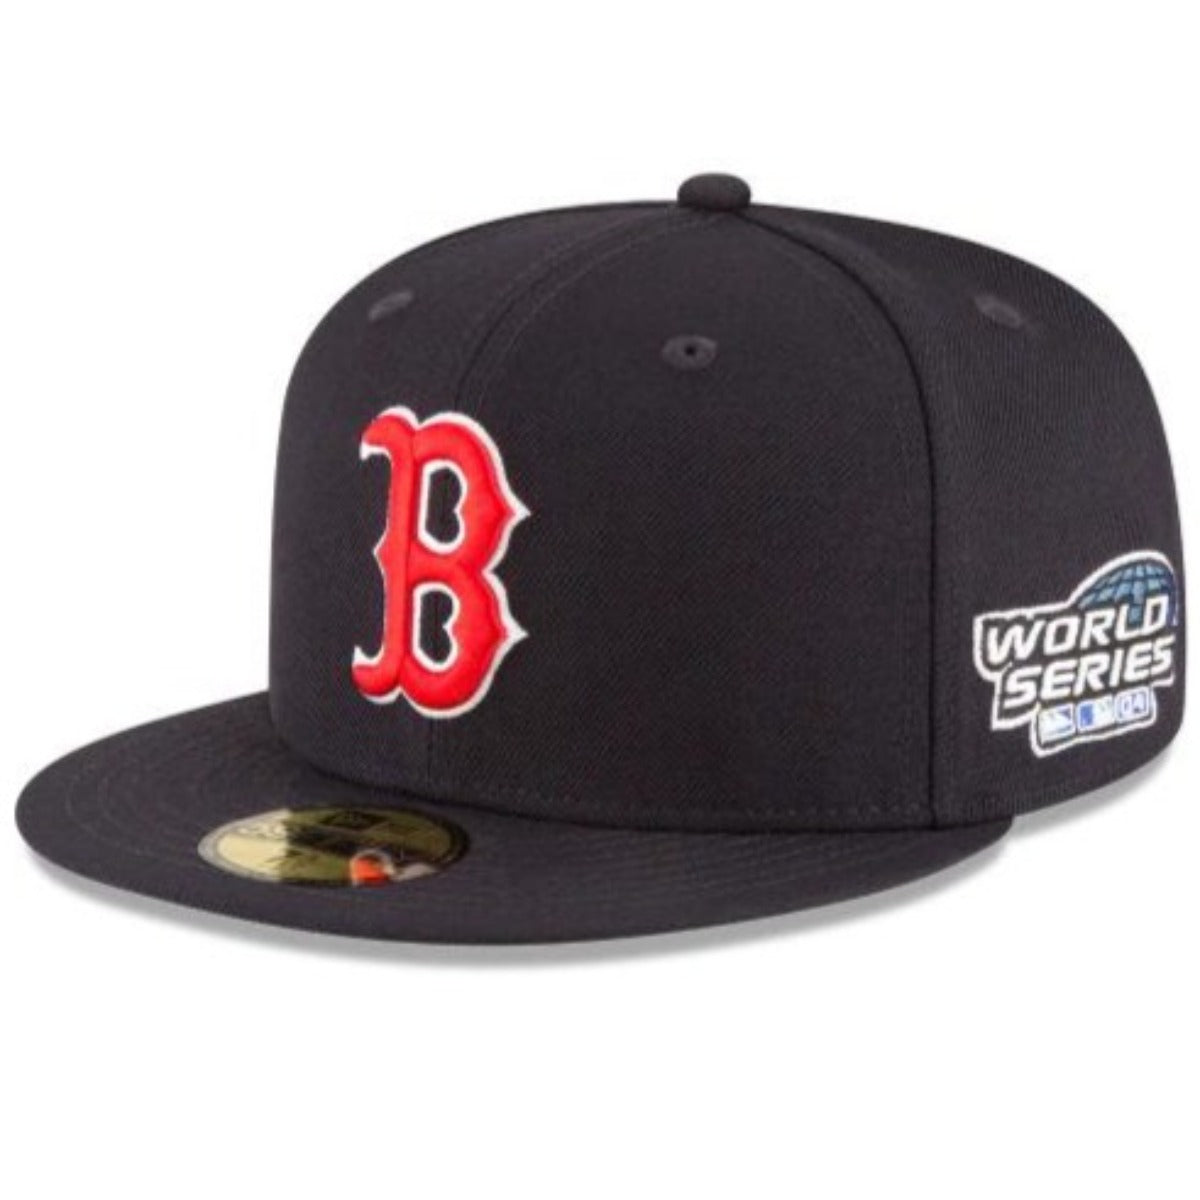 BOSTON RED SOX WORLD SERIES 2004 PATCH COLLECTION 59FIFTY FITTED-NAVY/RED Nvsoccer.com Thecoliseum